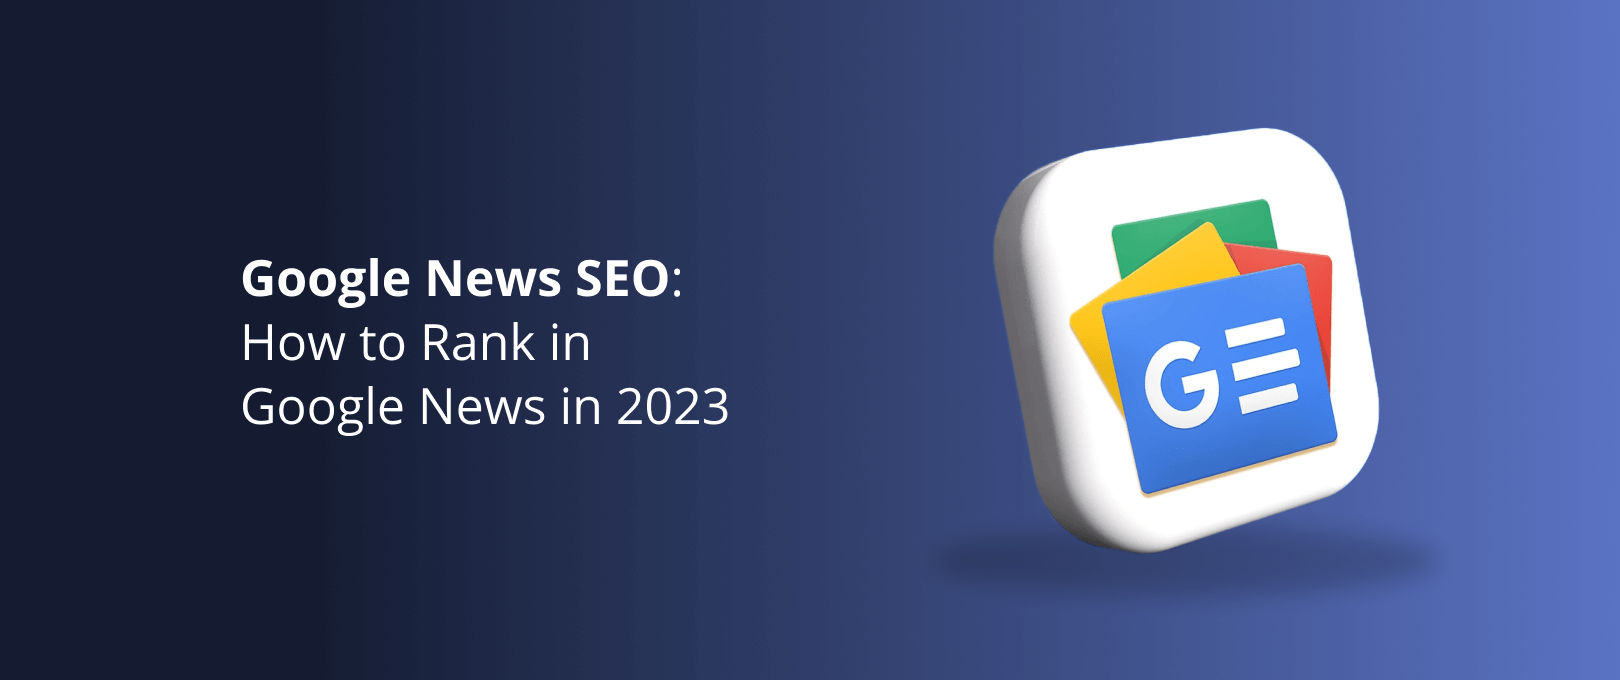 Google News SEO: How to Rank in Google News in 2023 